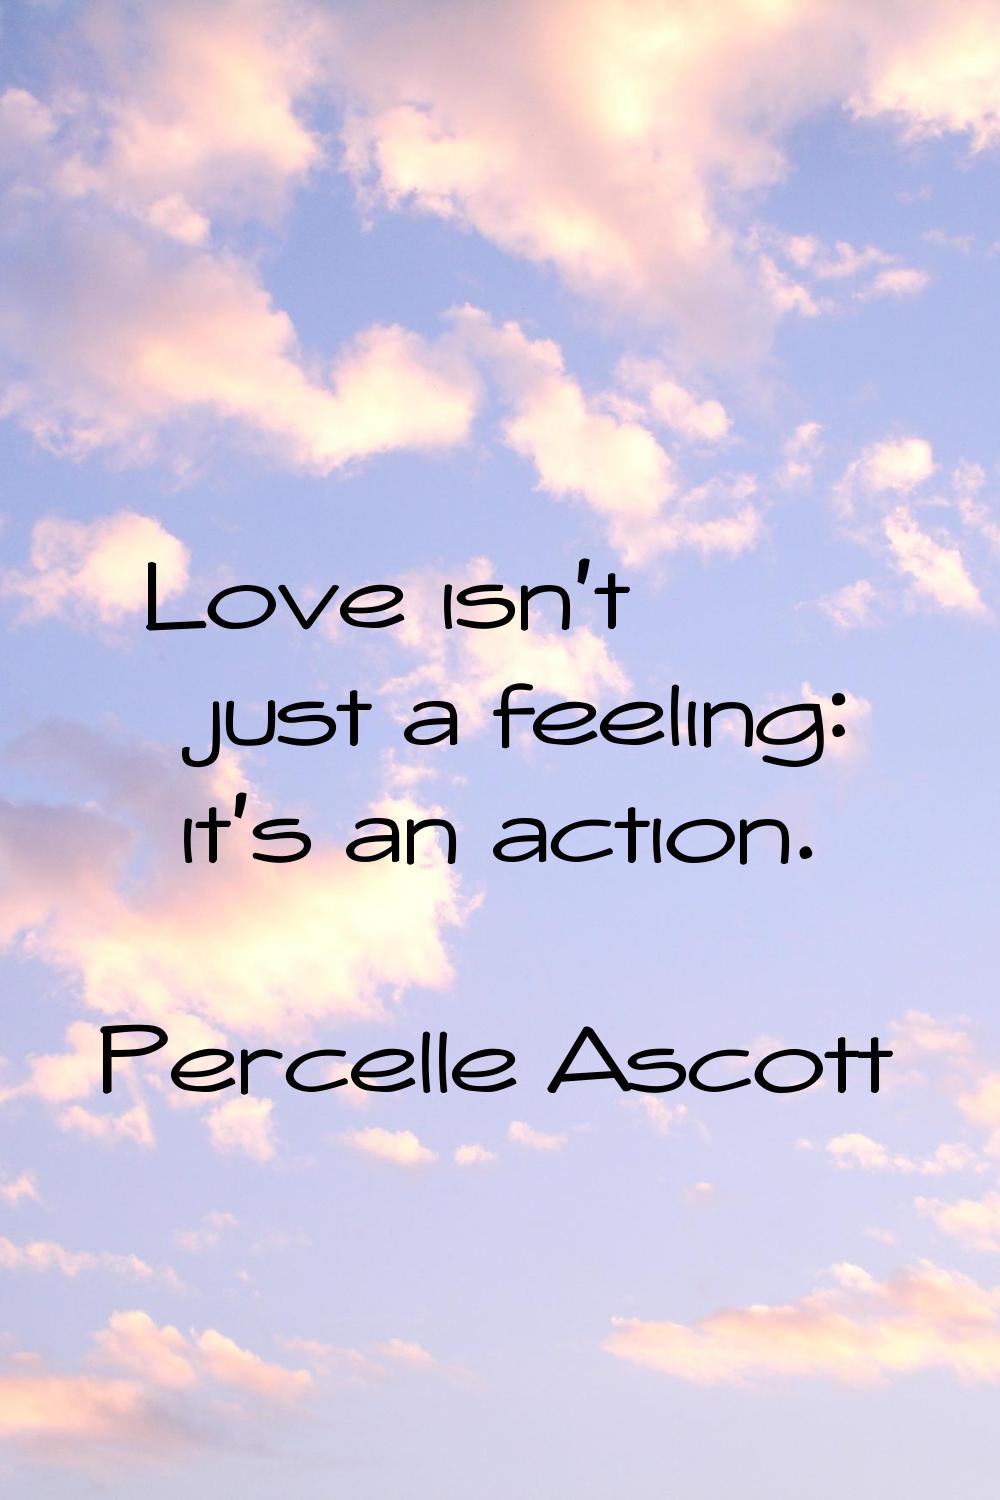 Love isn't just a feeling: it's an action.